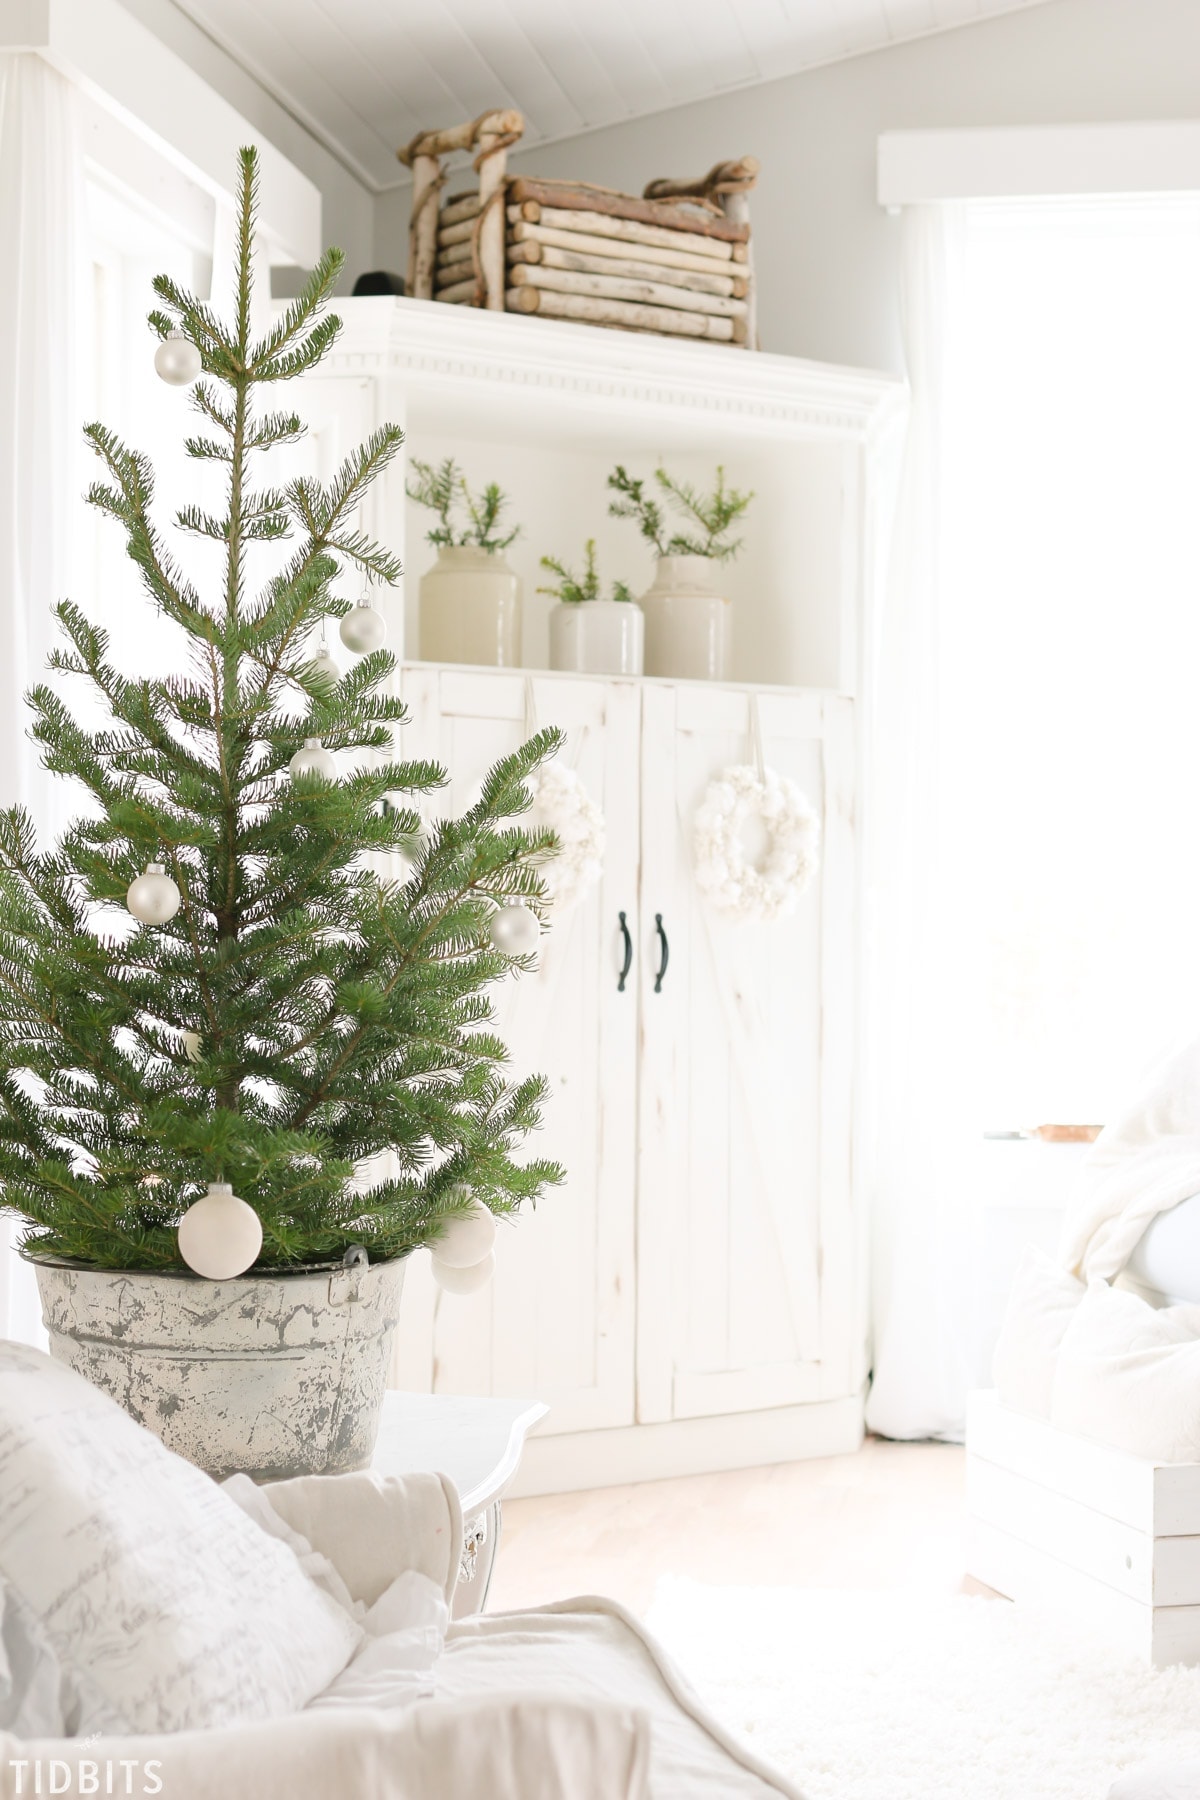 6 Tips for Changing Your Christmas Theme